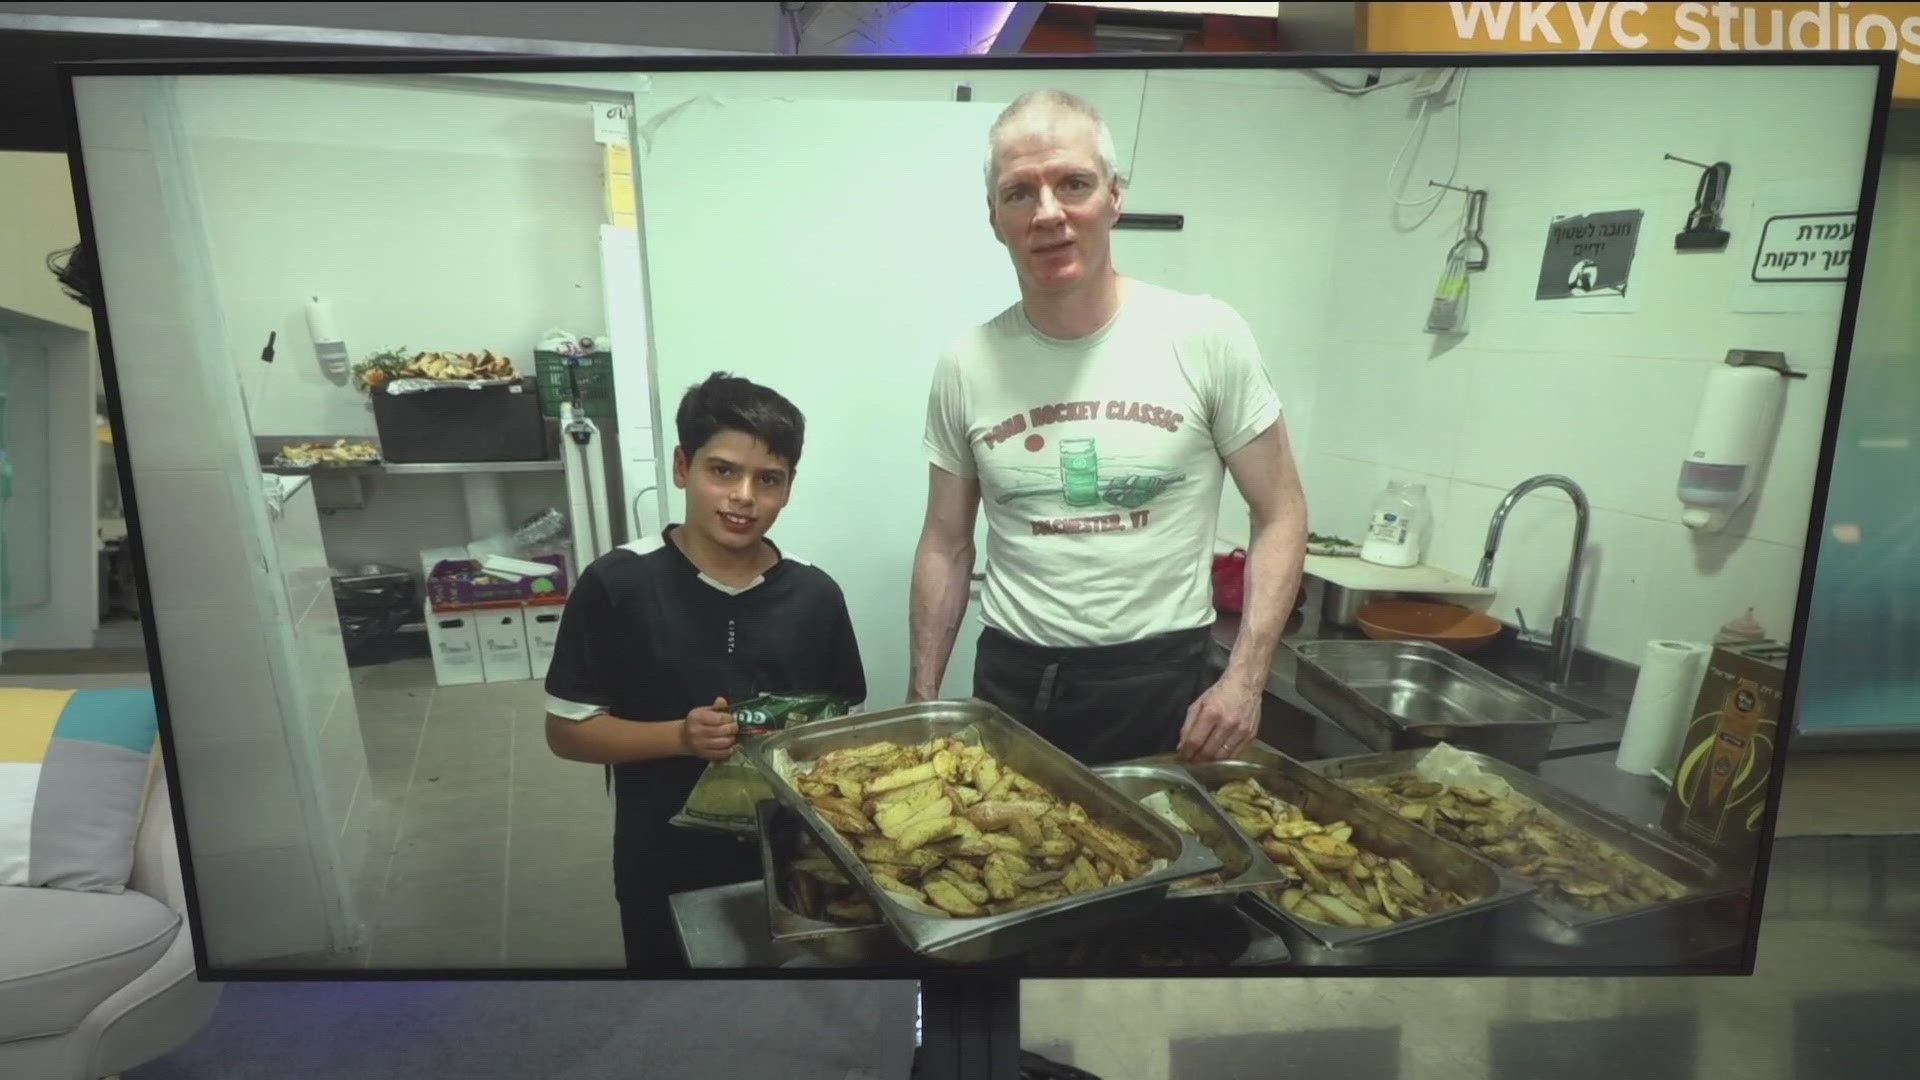 Brandon Chrostowski spent a week in Israel cooking for Israelis impacted and displaced by the ongoing war.